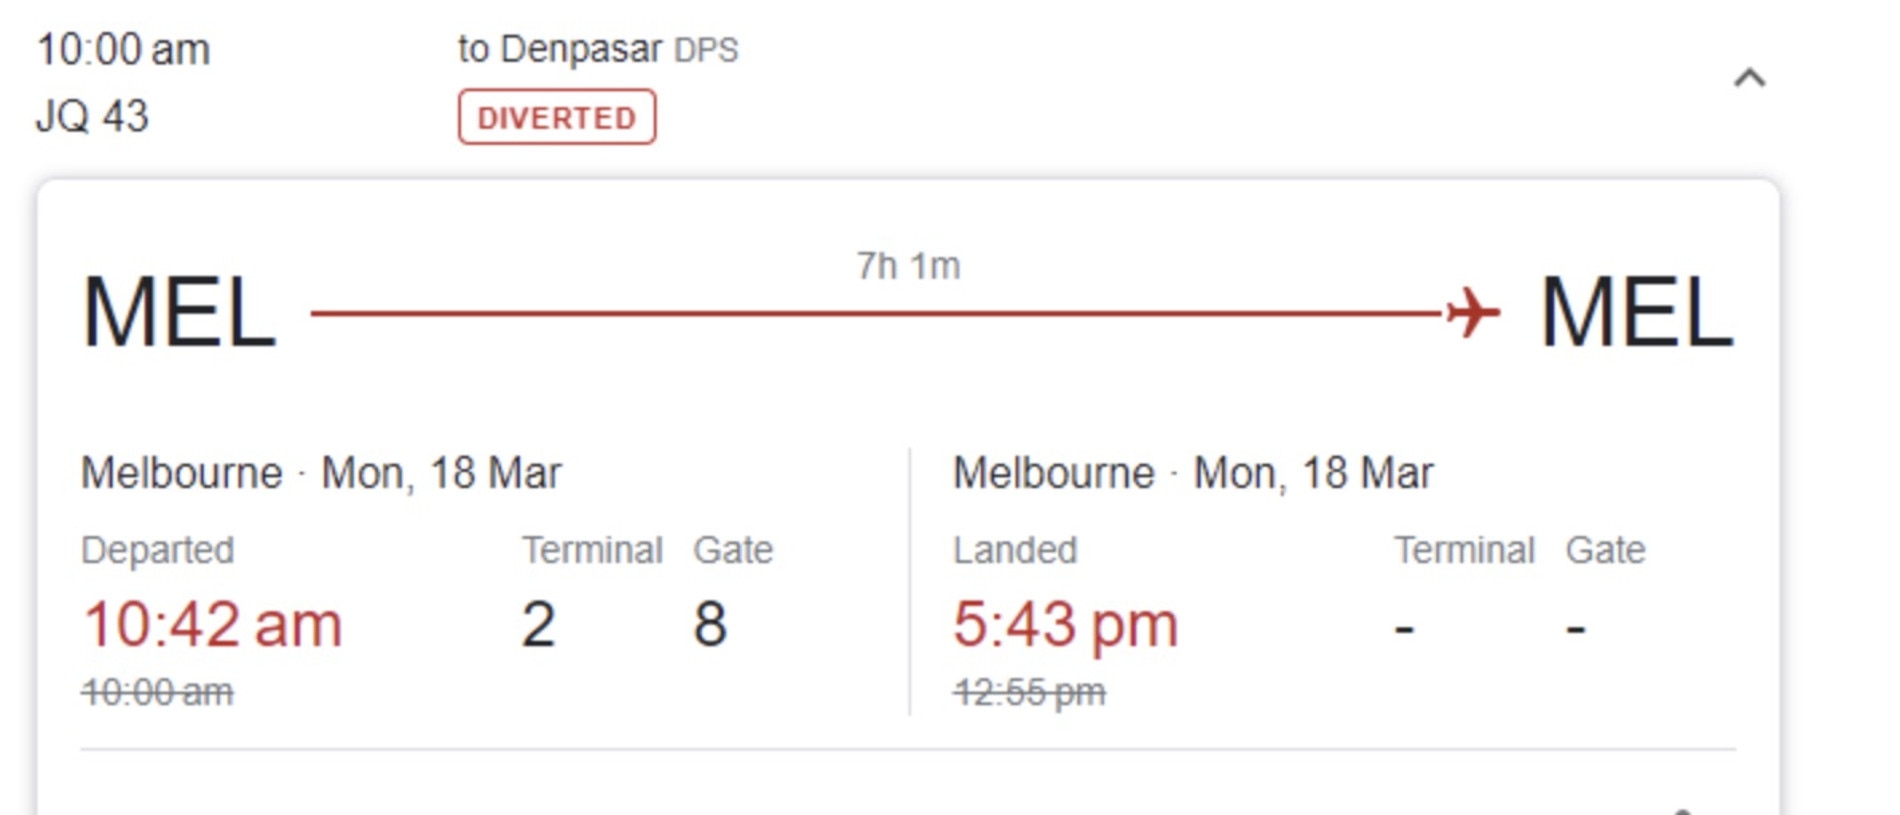 The flight had taken off at 10am only to arrive back in Melbourne at 3pm.